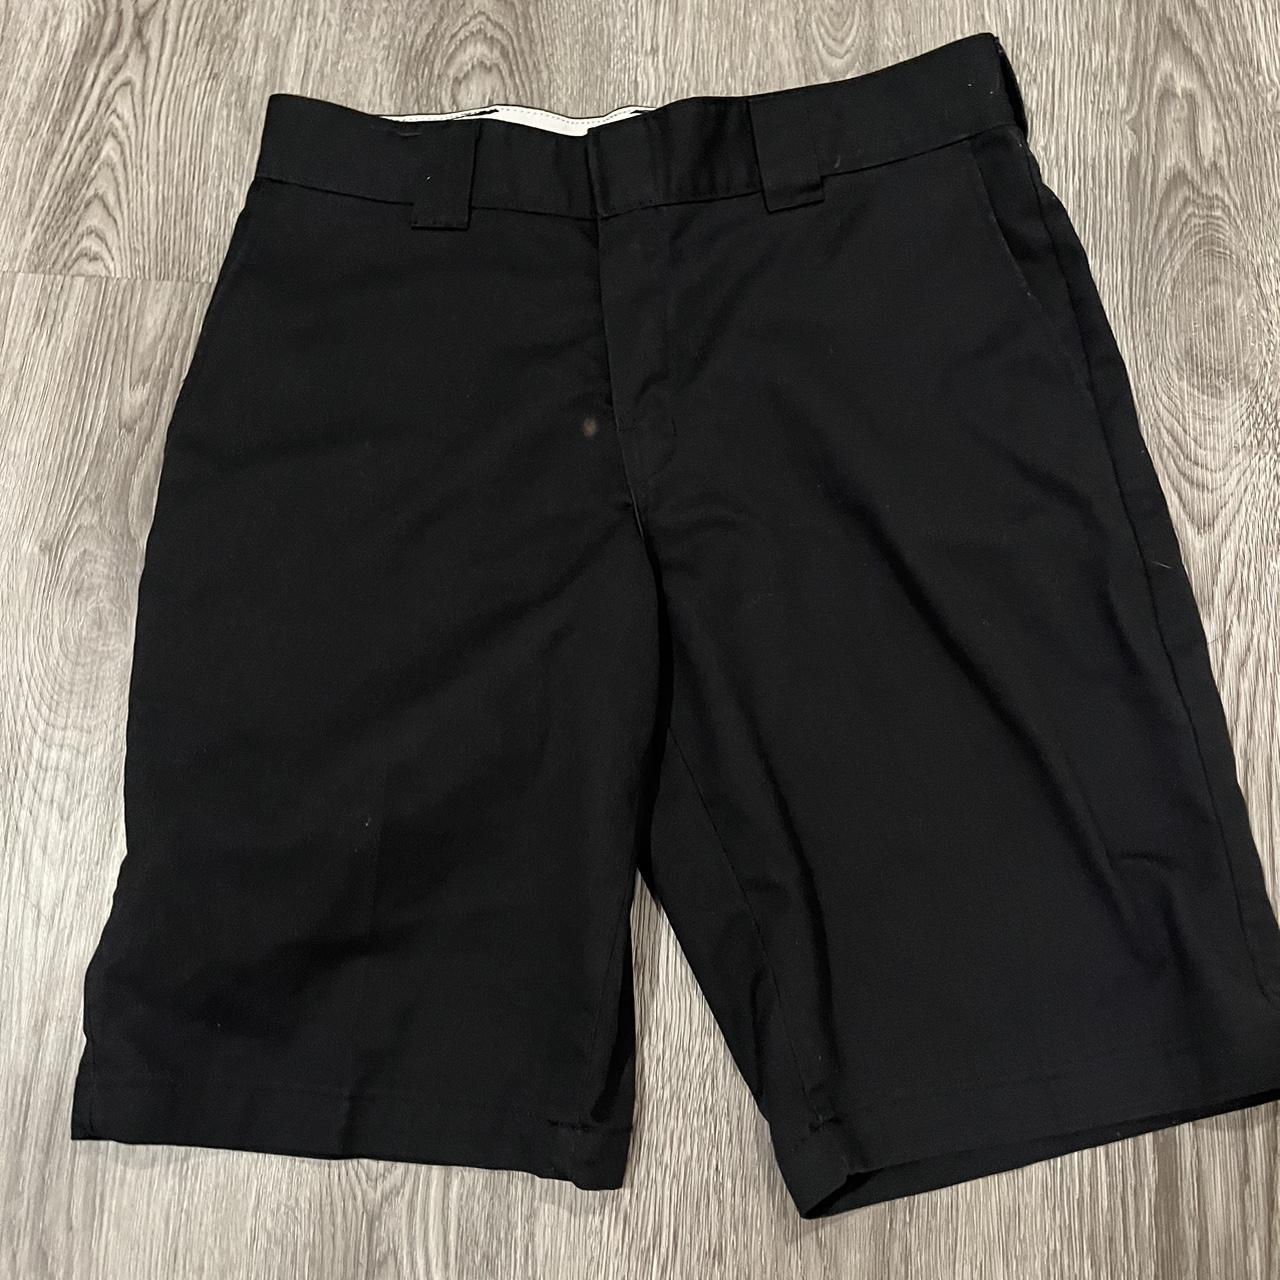 black dickies shorts, minor flaws shown size: 32